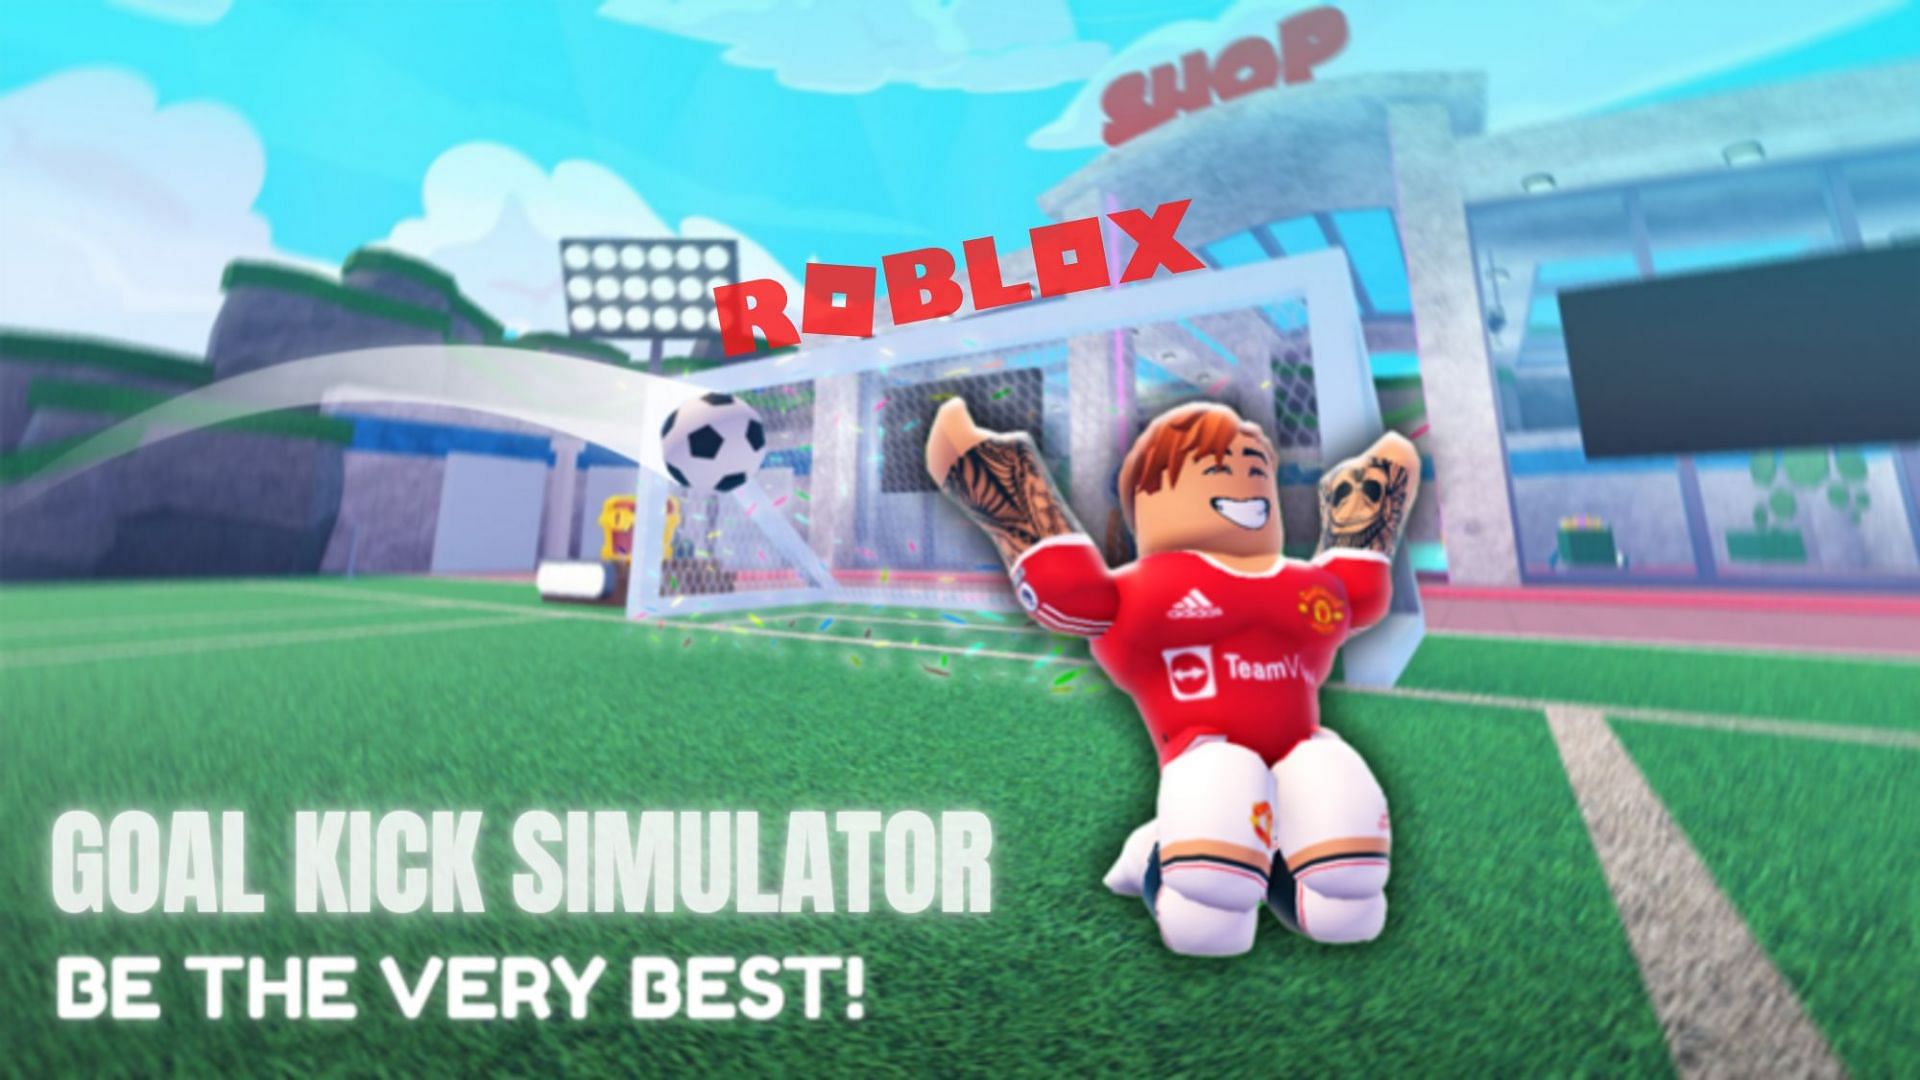 Have fun scoring goals with these free codes (Image via Roblox)